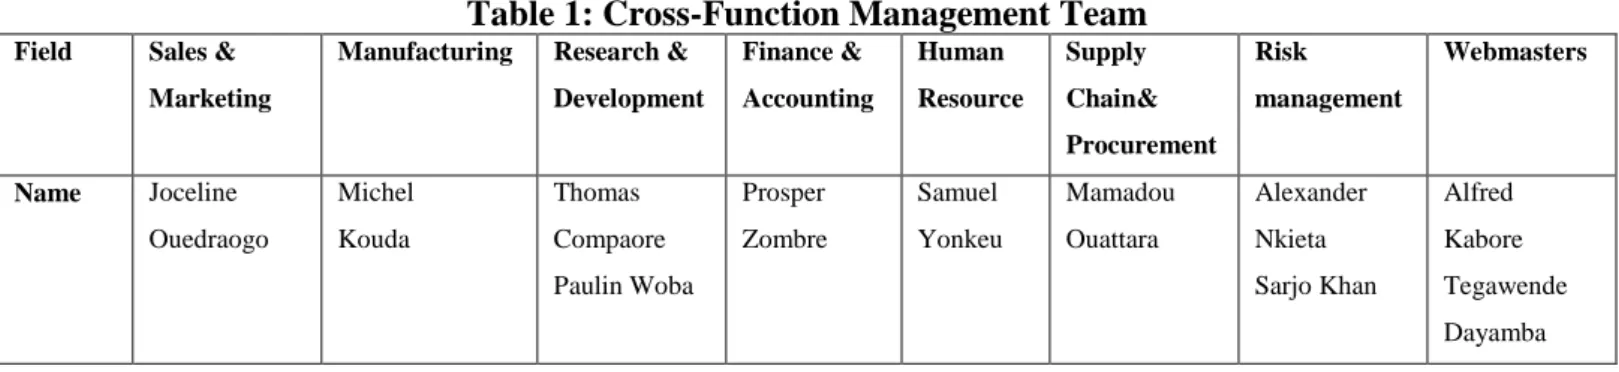 Table 1: Cross-Function Management Team 